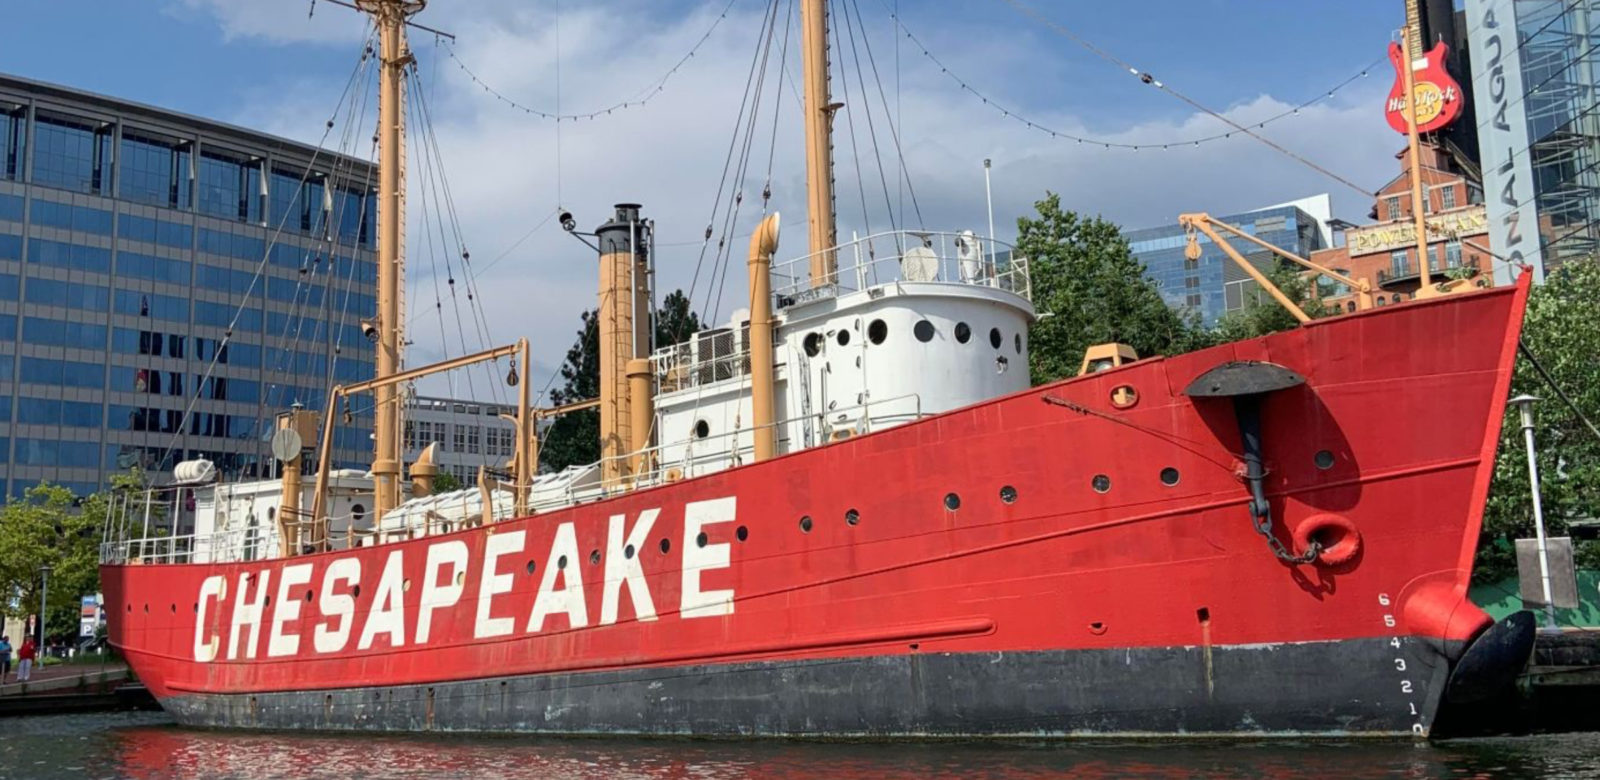 Large, red boat on harbor outside of Renaissance Baltimore Harborplace Hotel with word "Chesapeake" on the side in large white letters